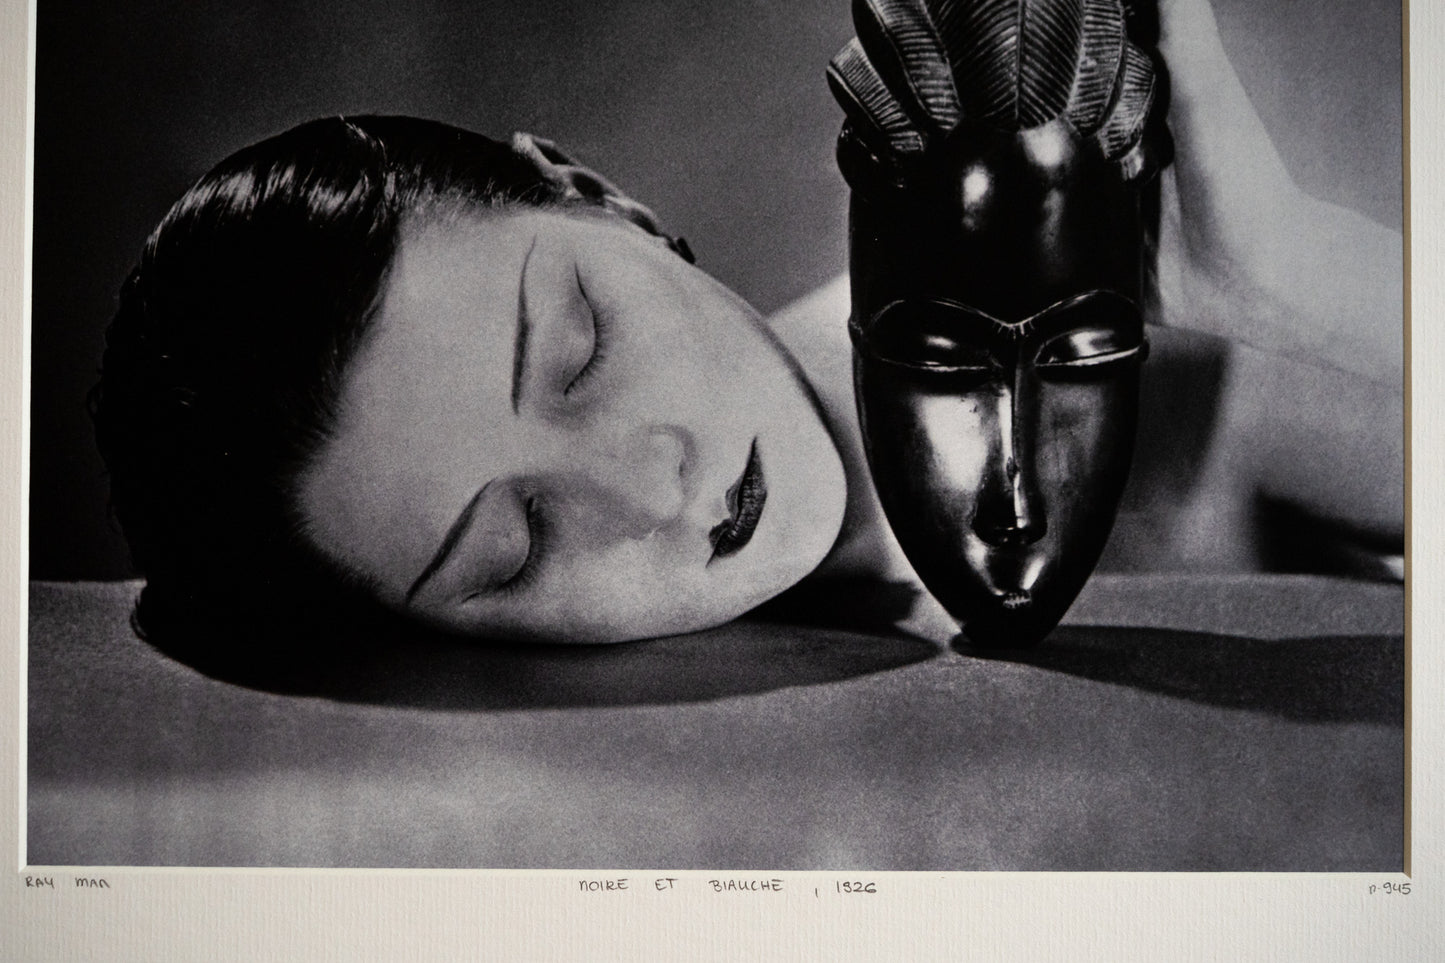 Man Ray Black and White, 1926 - Out of print edition